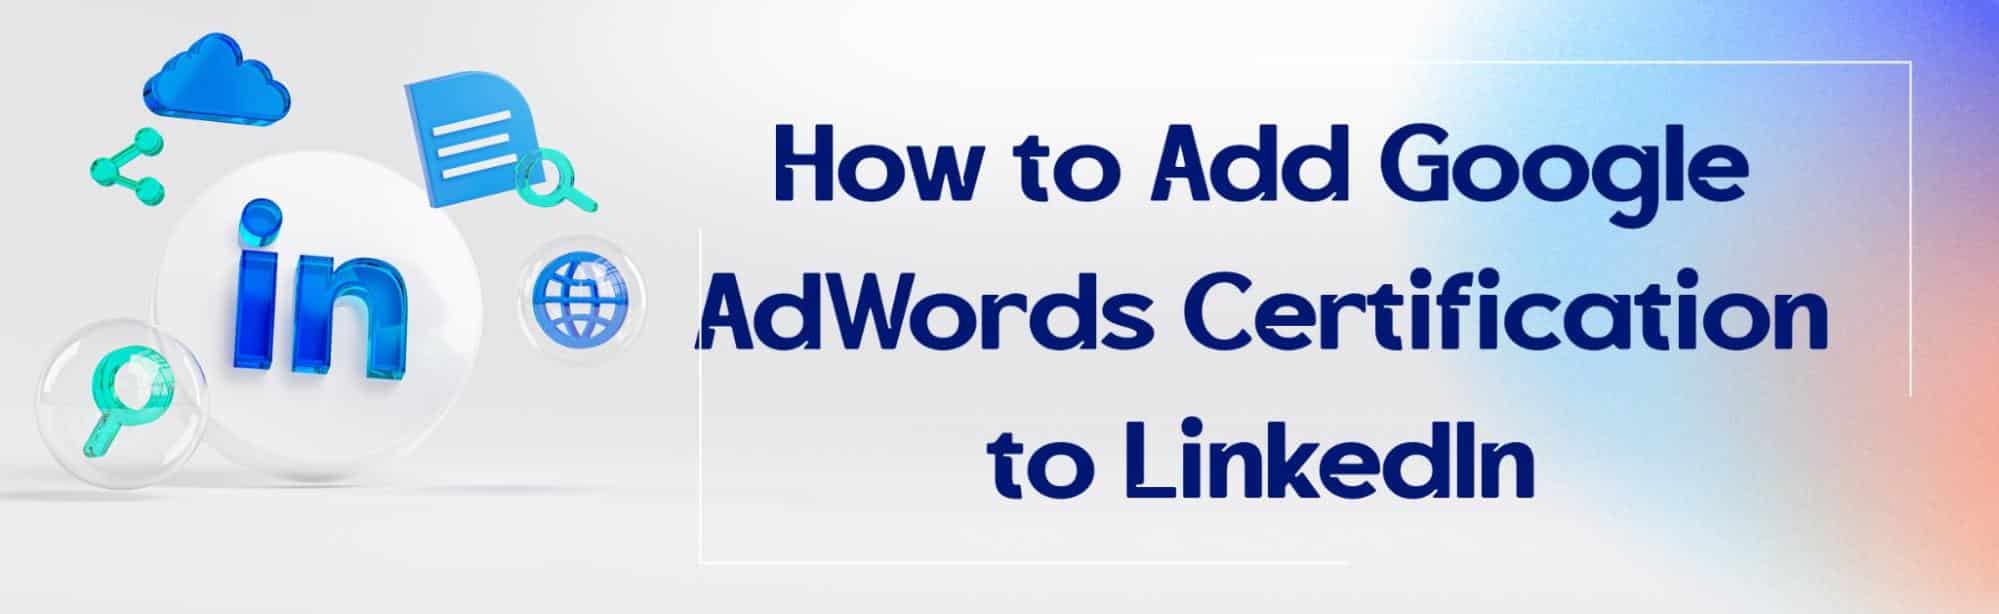 How to Add Google AdWords Certification to LinkedIn?